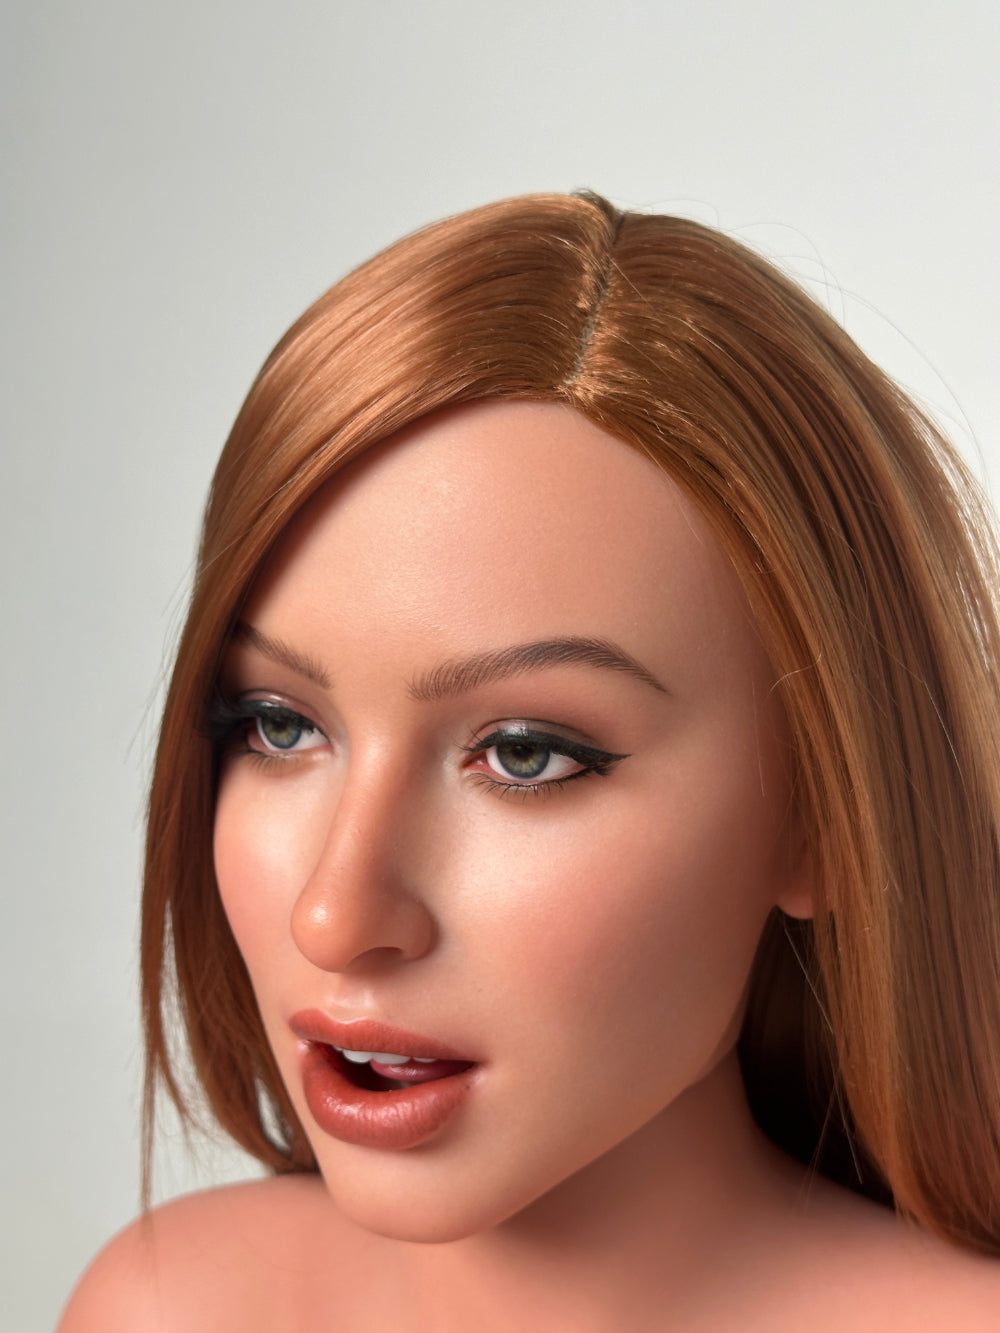 Zelex Doll SLE Series 153 cm B Silicone - ZXE208-2  Movable Jaw